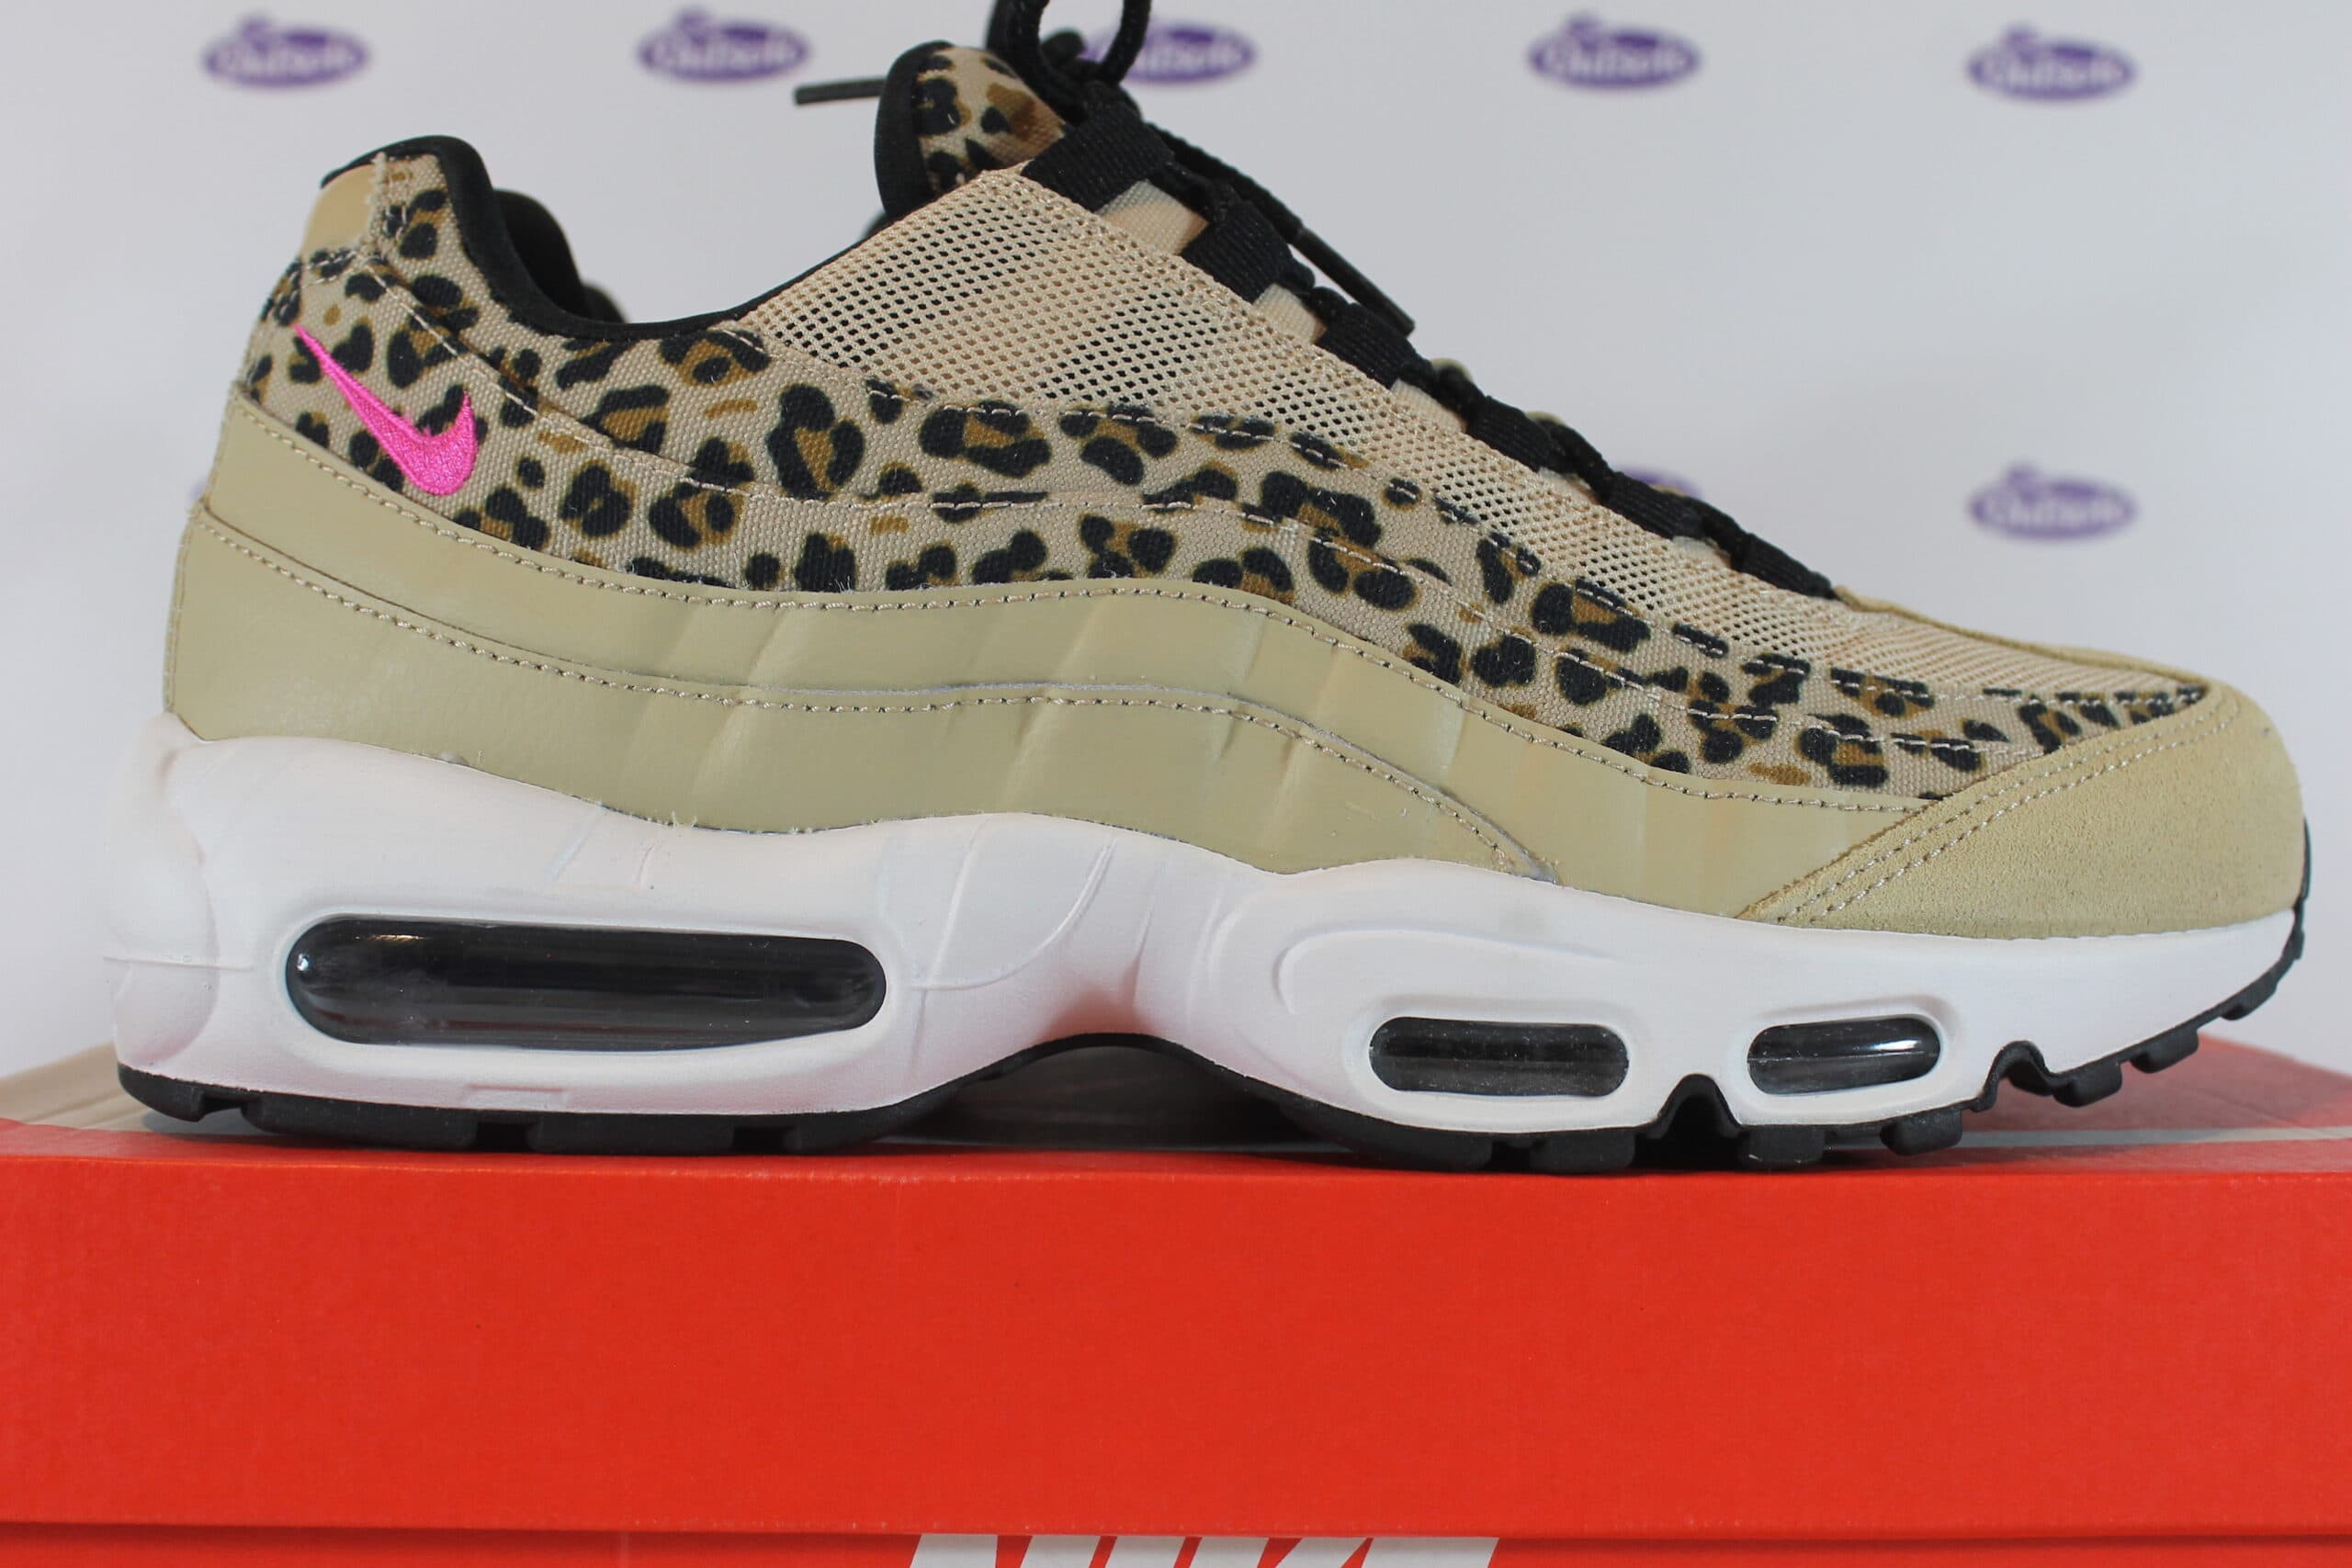 typist Hechting Doe mee Nike Air Max 95 Premium Leopard • ✓ In stock at Outsole